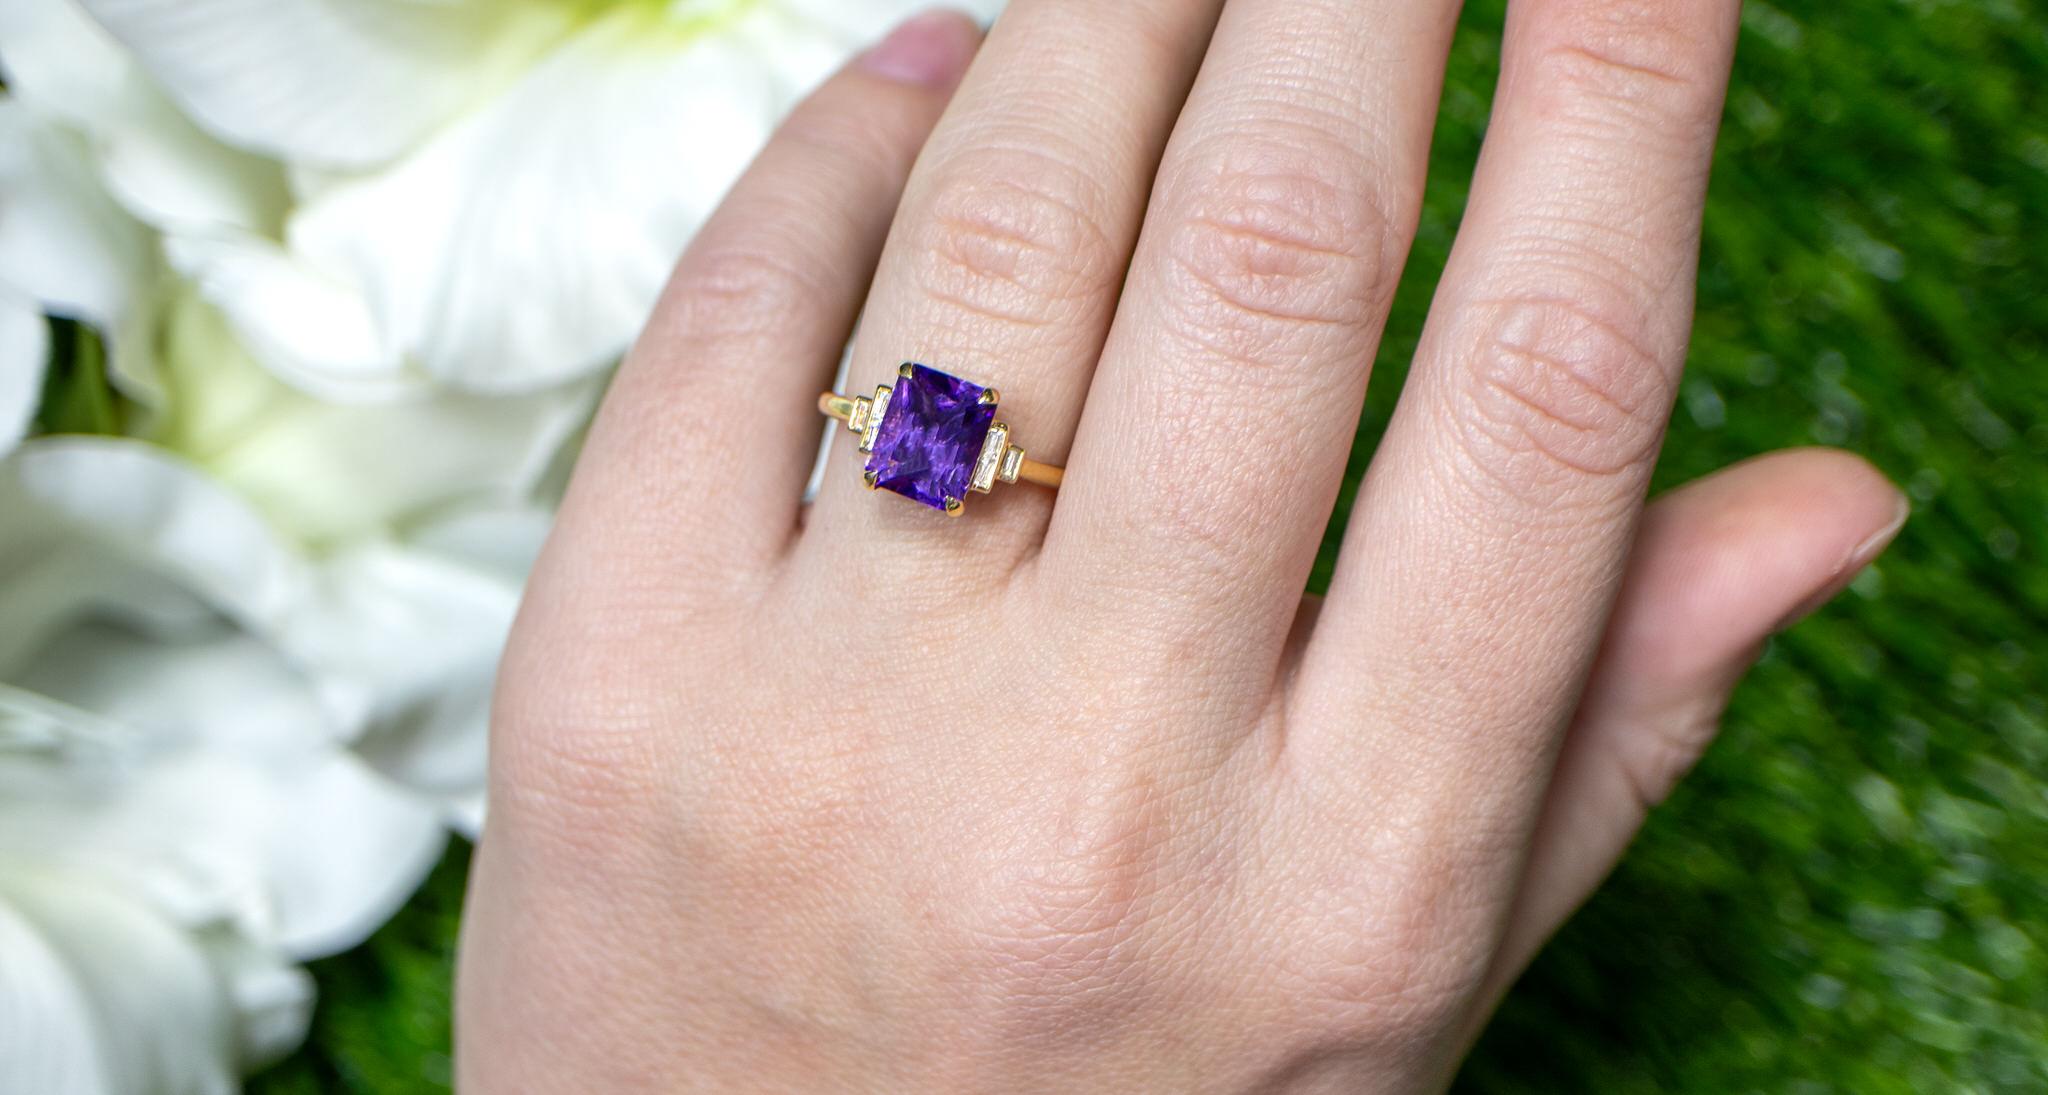 It comes with the Gemological Appraisal by GIA GG/AJP
All Gemstones are Natural
Amethyst = 2.23 Carats
Diamonds = 0.12 Carats
Metal: 18K Yellow Gold
Ring Size: 6.5* US
*It can be resized complimentary